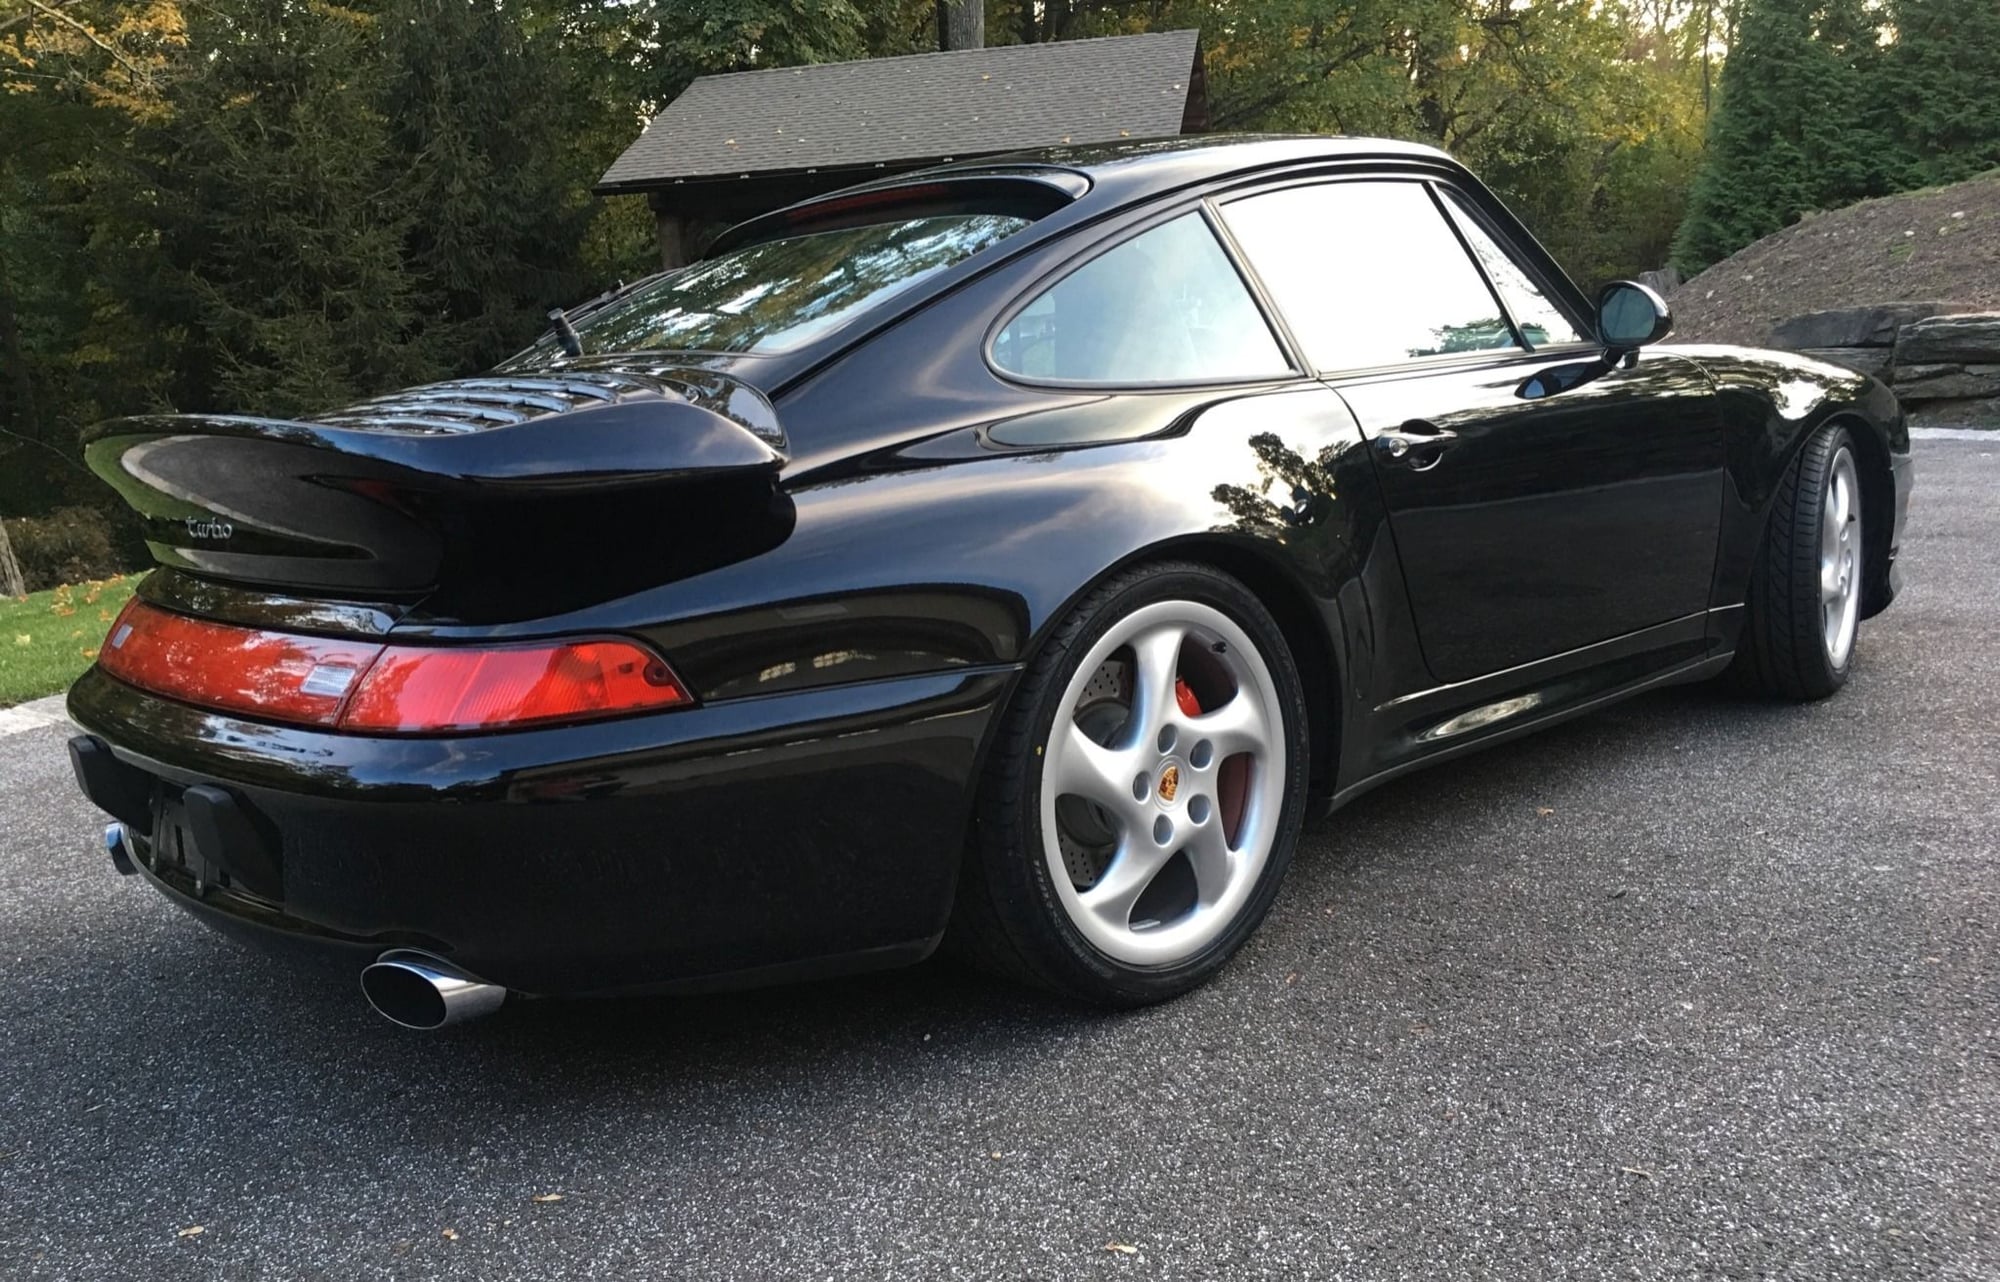 1996 Porsche 911 - 22k miles, excellent condition 993 TT - Used - VIN WP0AC2997TS37543 - 6 cyl - 2WD - Manual - Coupe - Black - San Francisco, CA 94111, United States